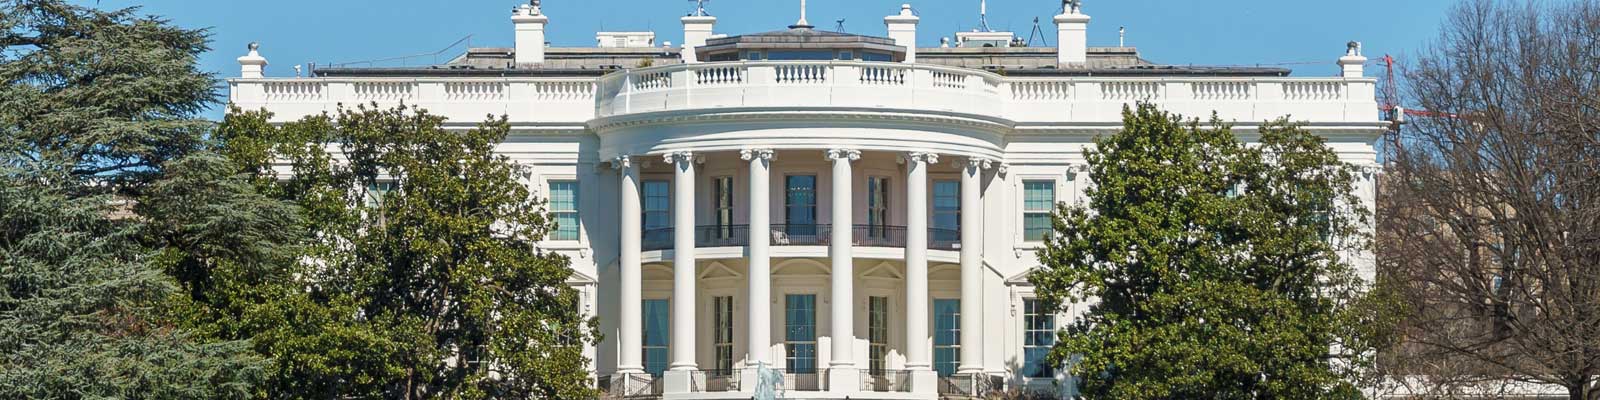 Pictured: The White House. This image represents ASTA-USA's professional translation services in Washington, DC.